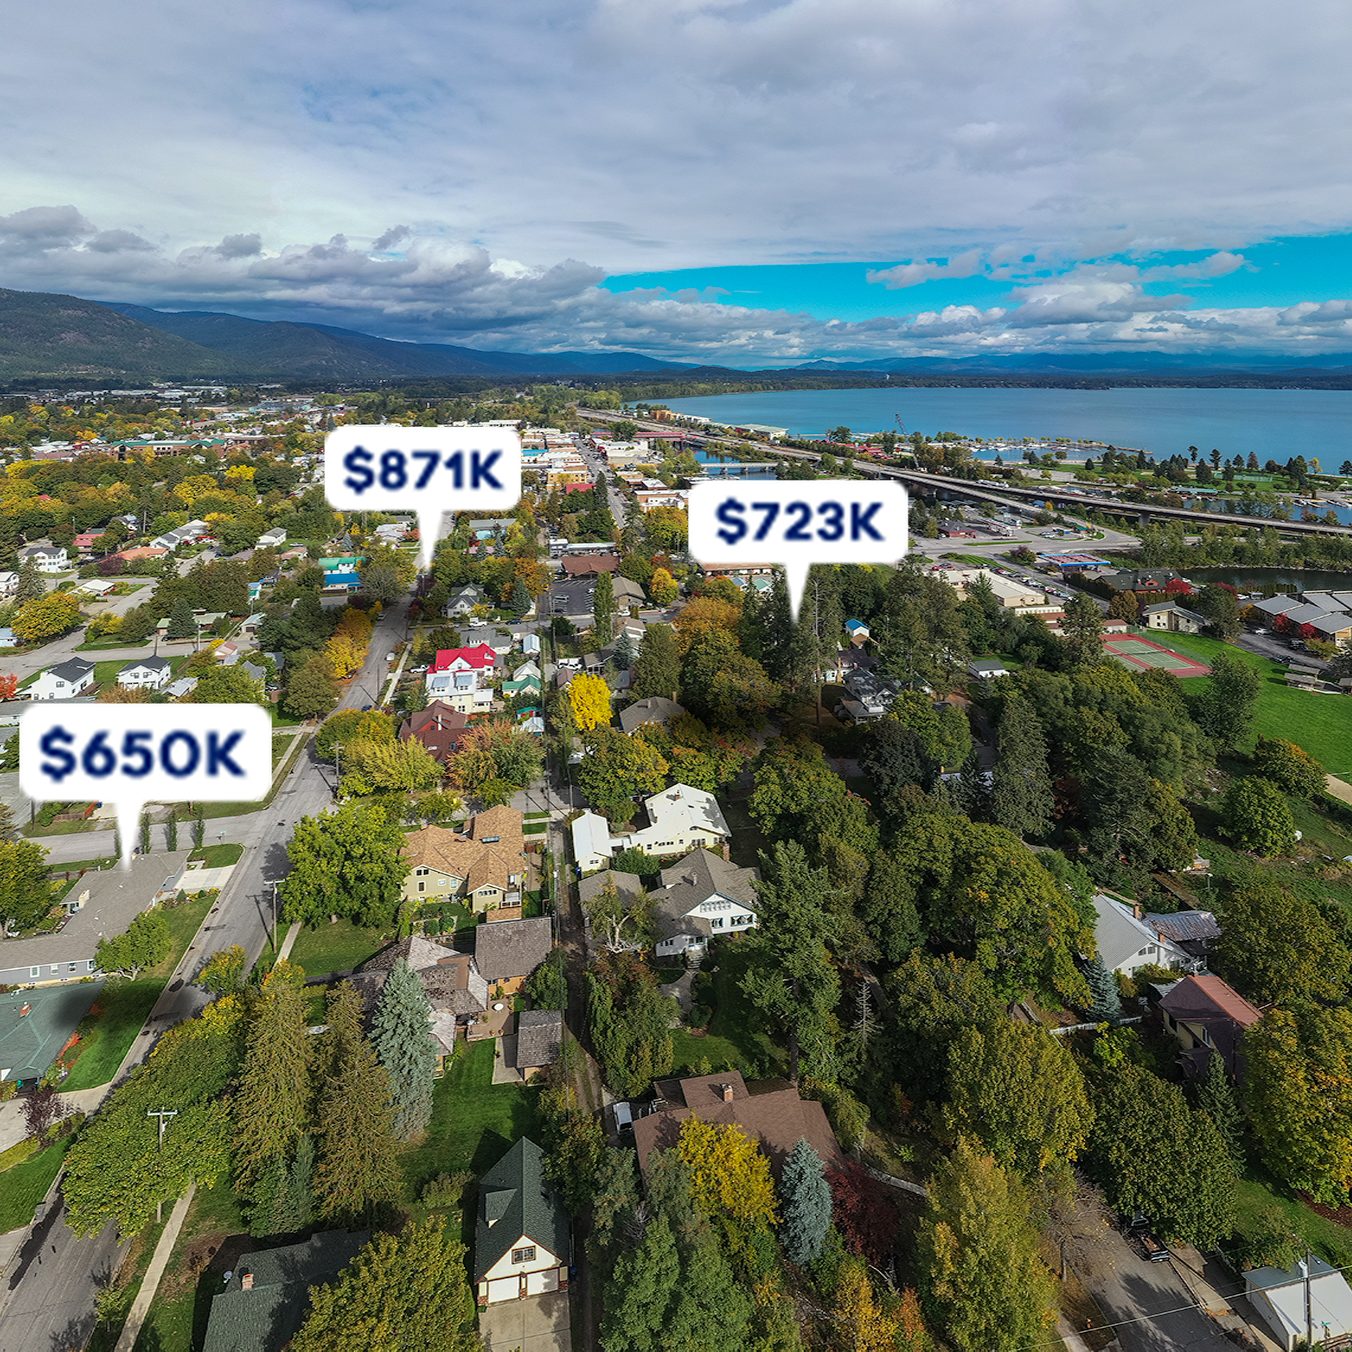 Real Estate Prices in Sandpoint, Idaho